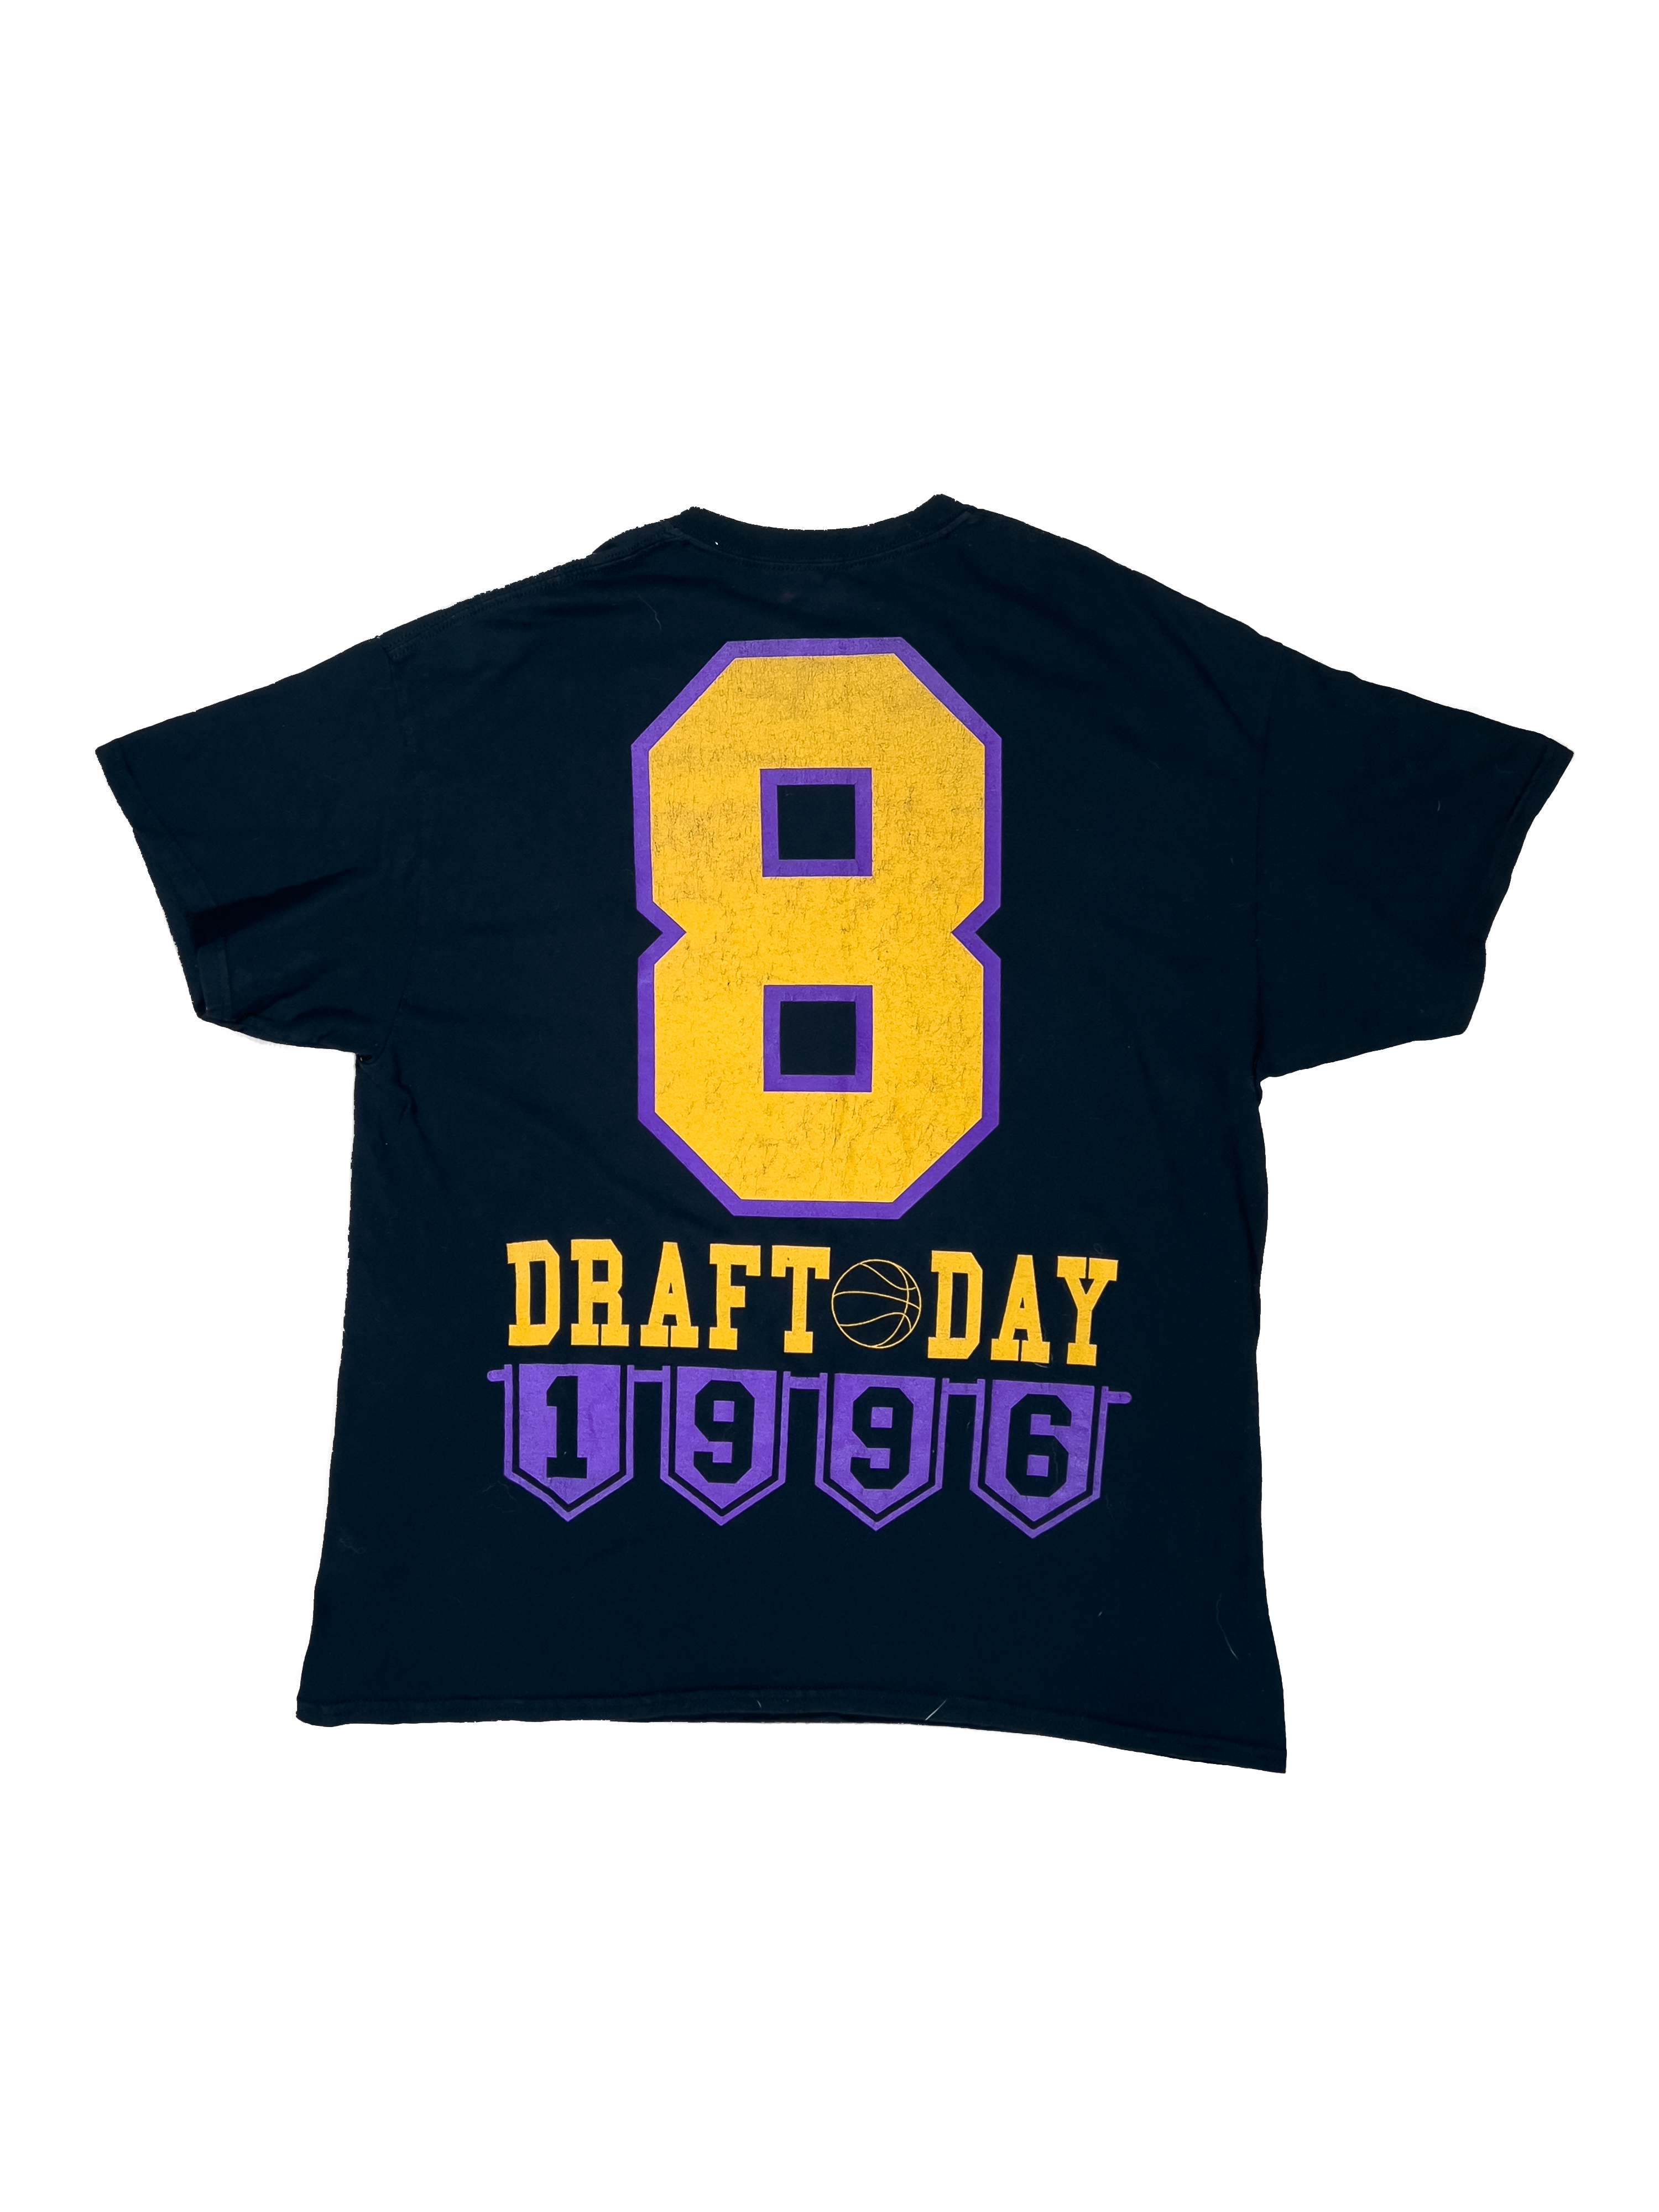 Kobe Bryant, Kobe Bryant, Kobe Bryant Free, tshirt, image File Formats,  jersey png